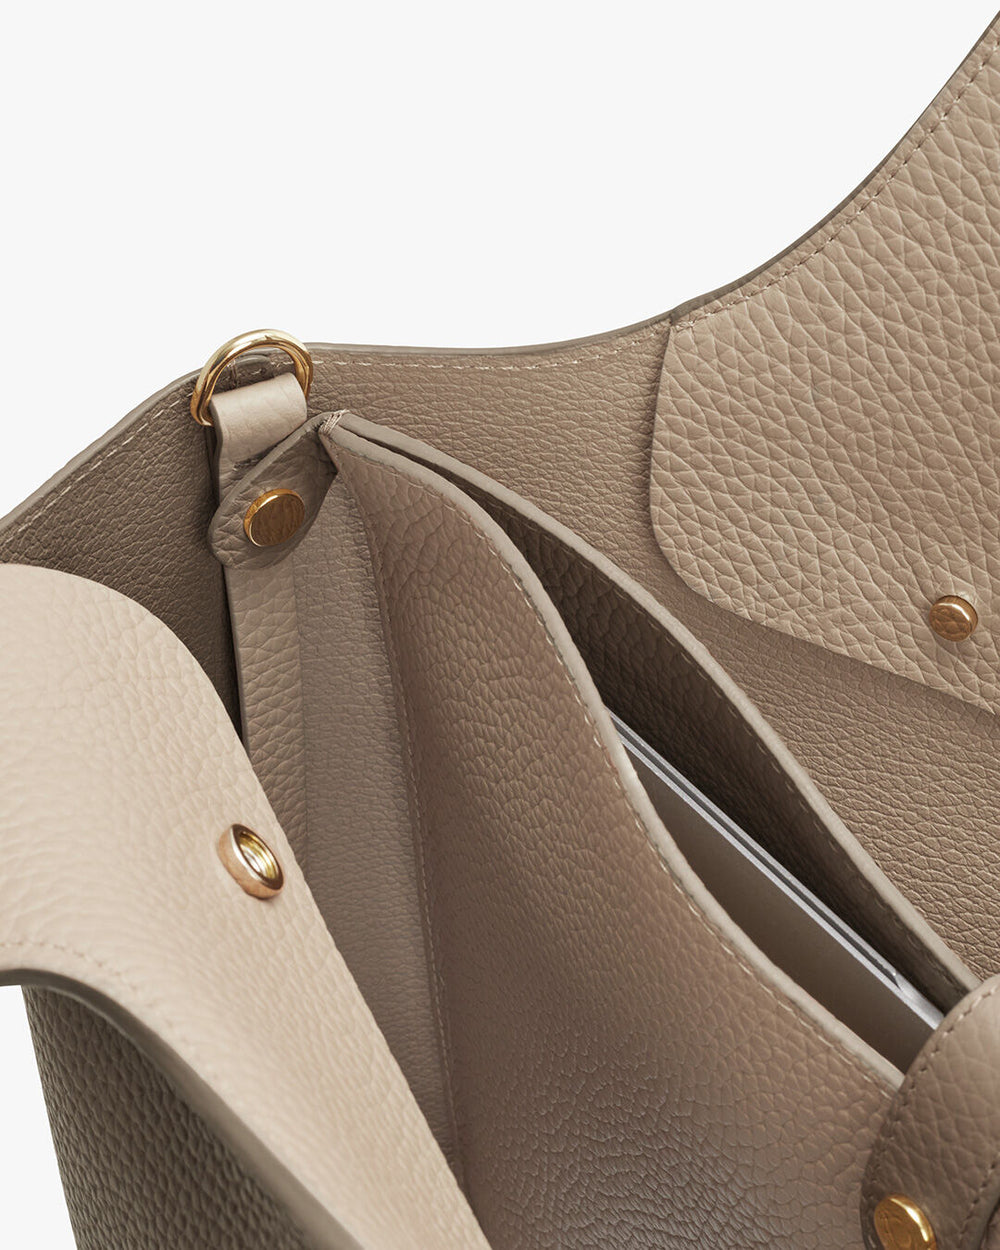 Close-up of an open handbag showing the interior and snap fasteners.